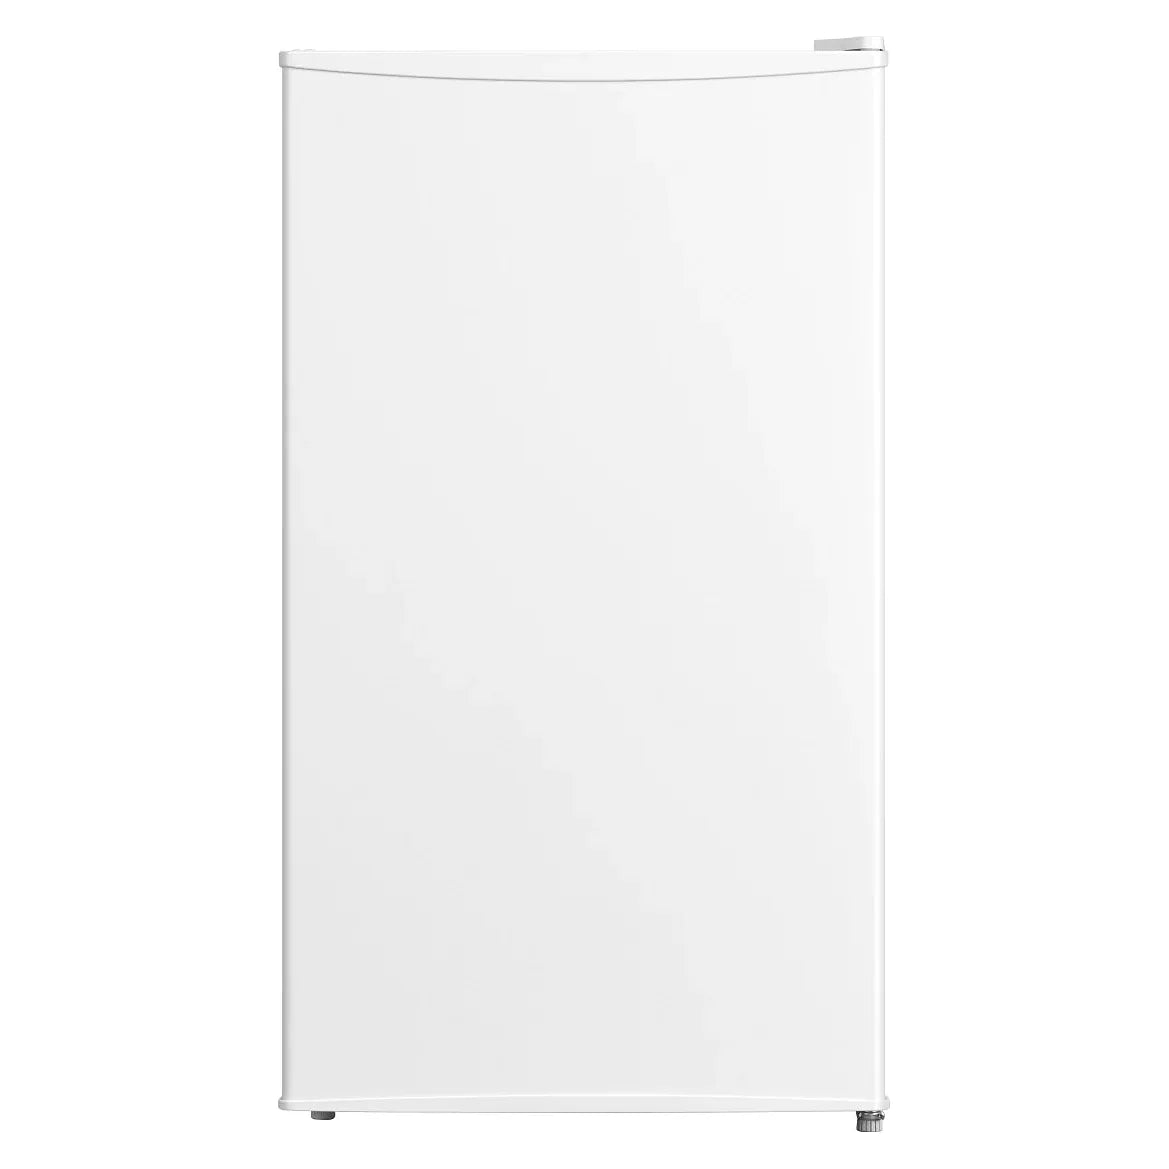 Thor 93L Freestanding Larder Fridge - White | T447LMDW from Thor - DID Electrical